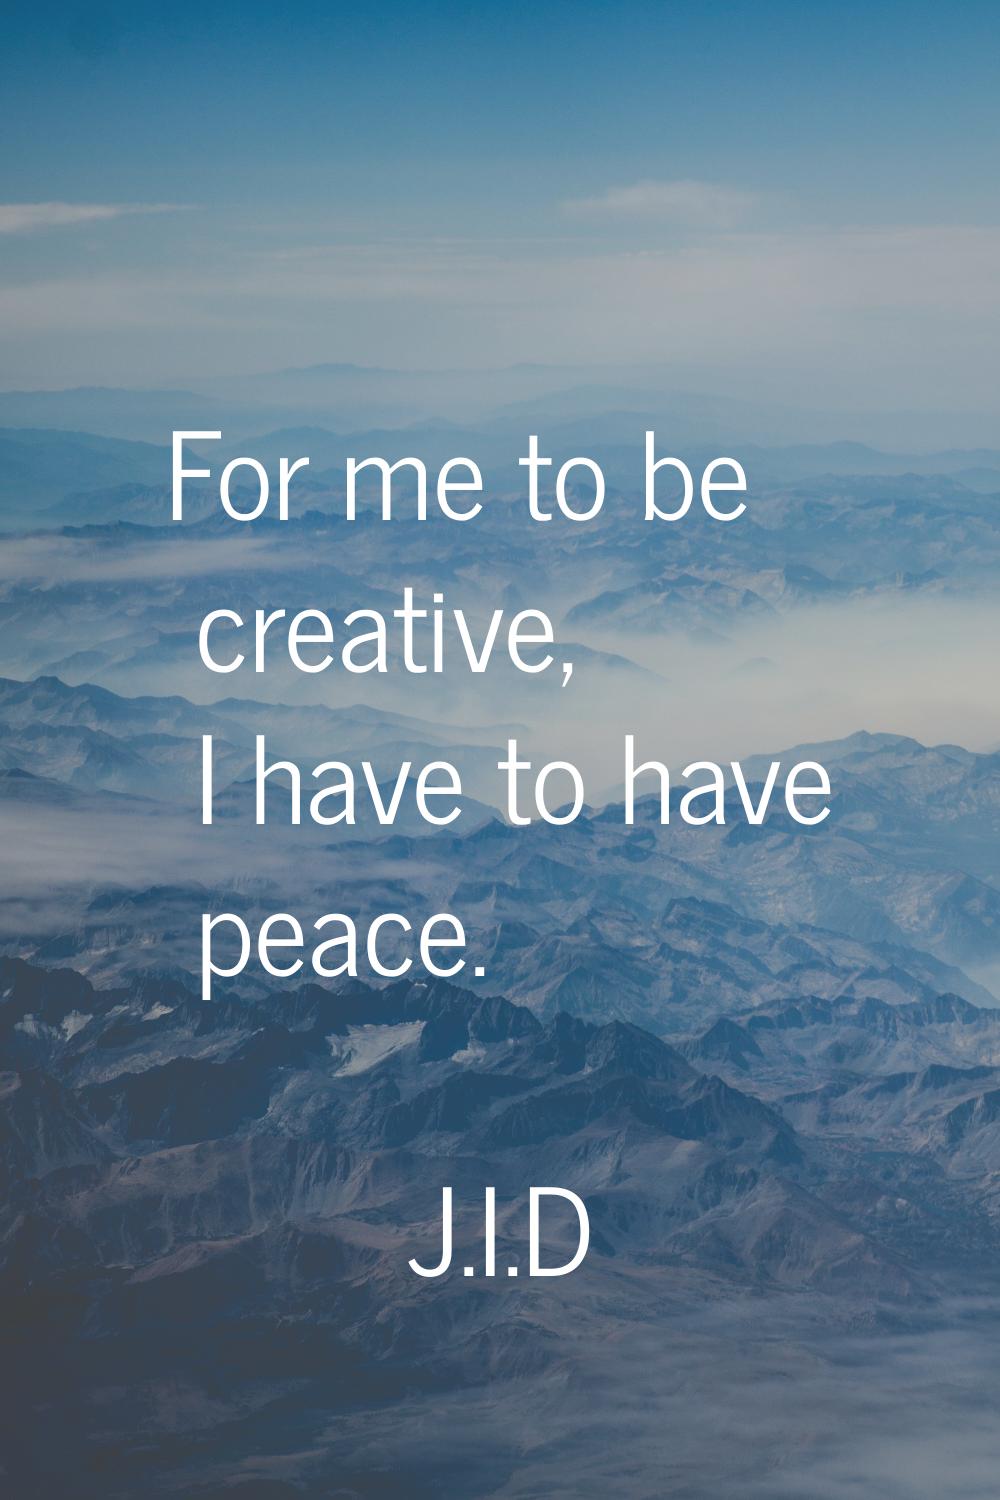 For me to be creative, I have to have peace.